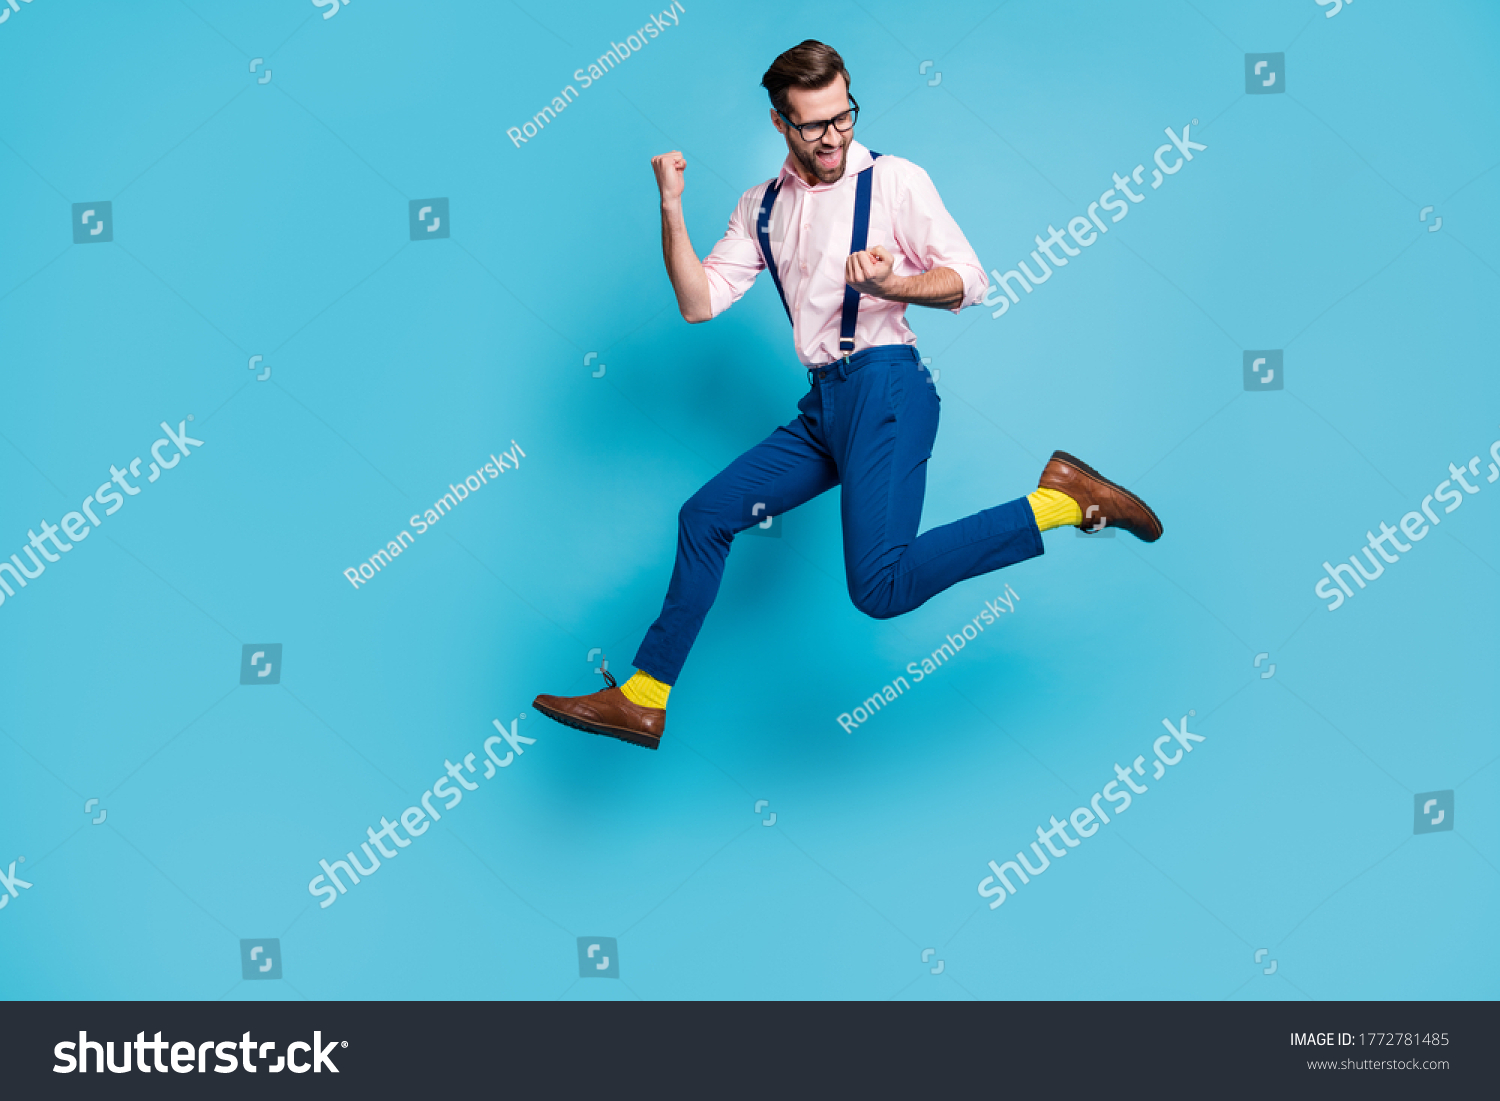 Full size profile photo of handsome man jump high up running competition raise fists first place winner race marathon wear specs shirt suspenders pants boots isolated blue color background #1772781485